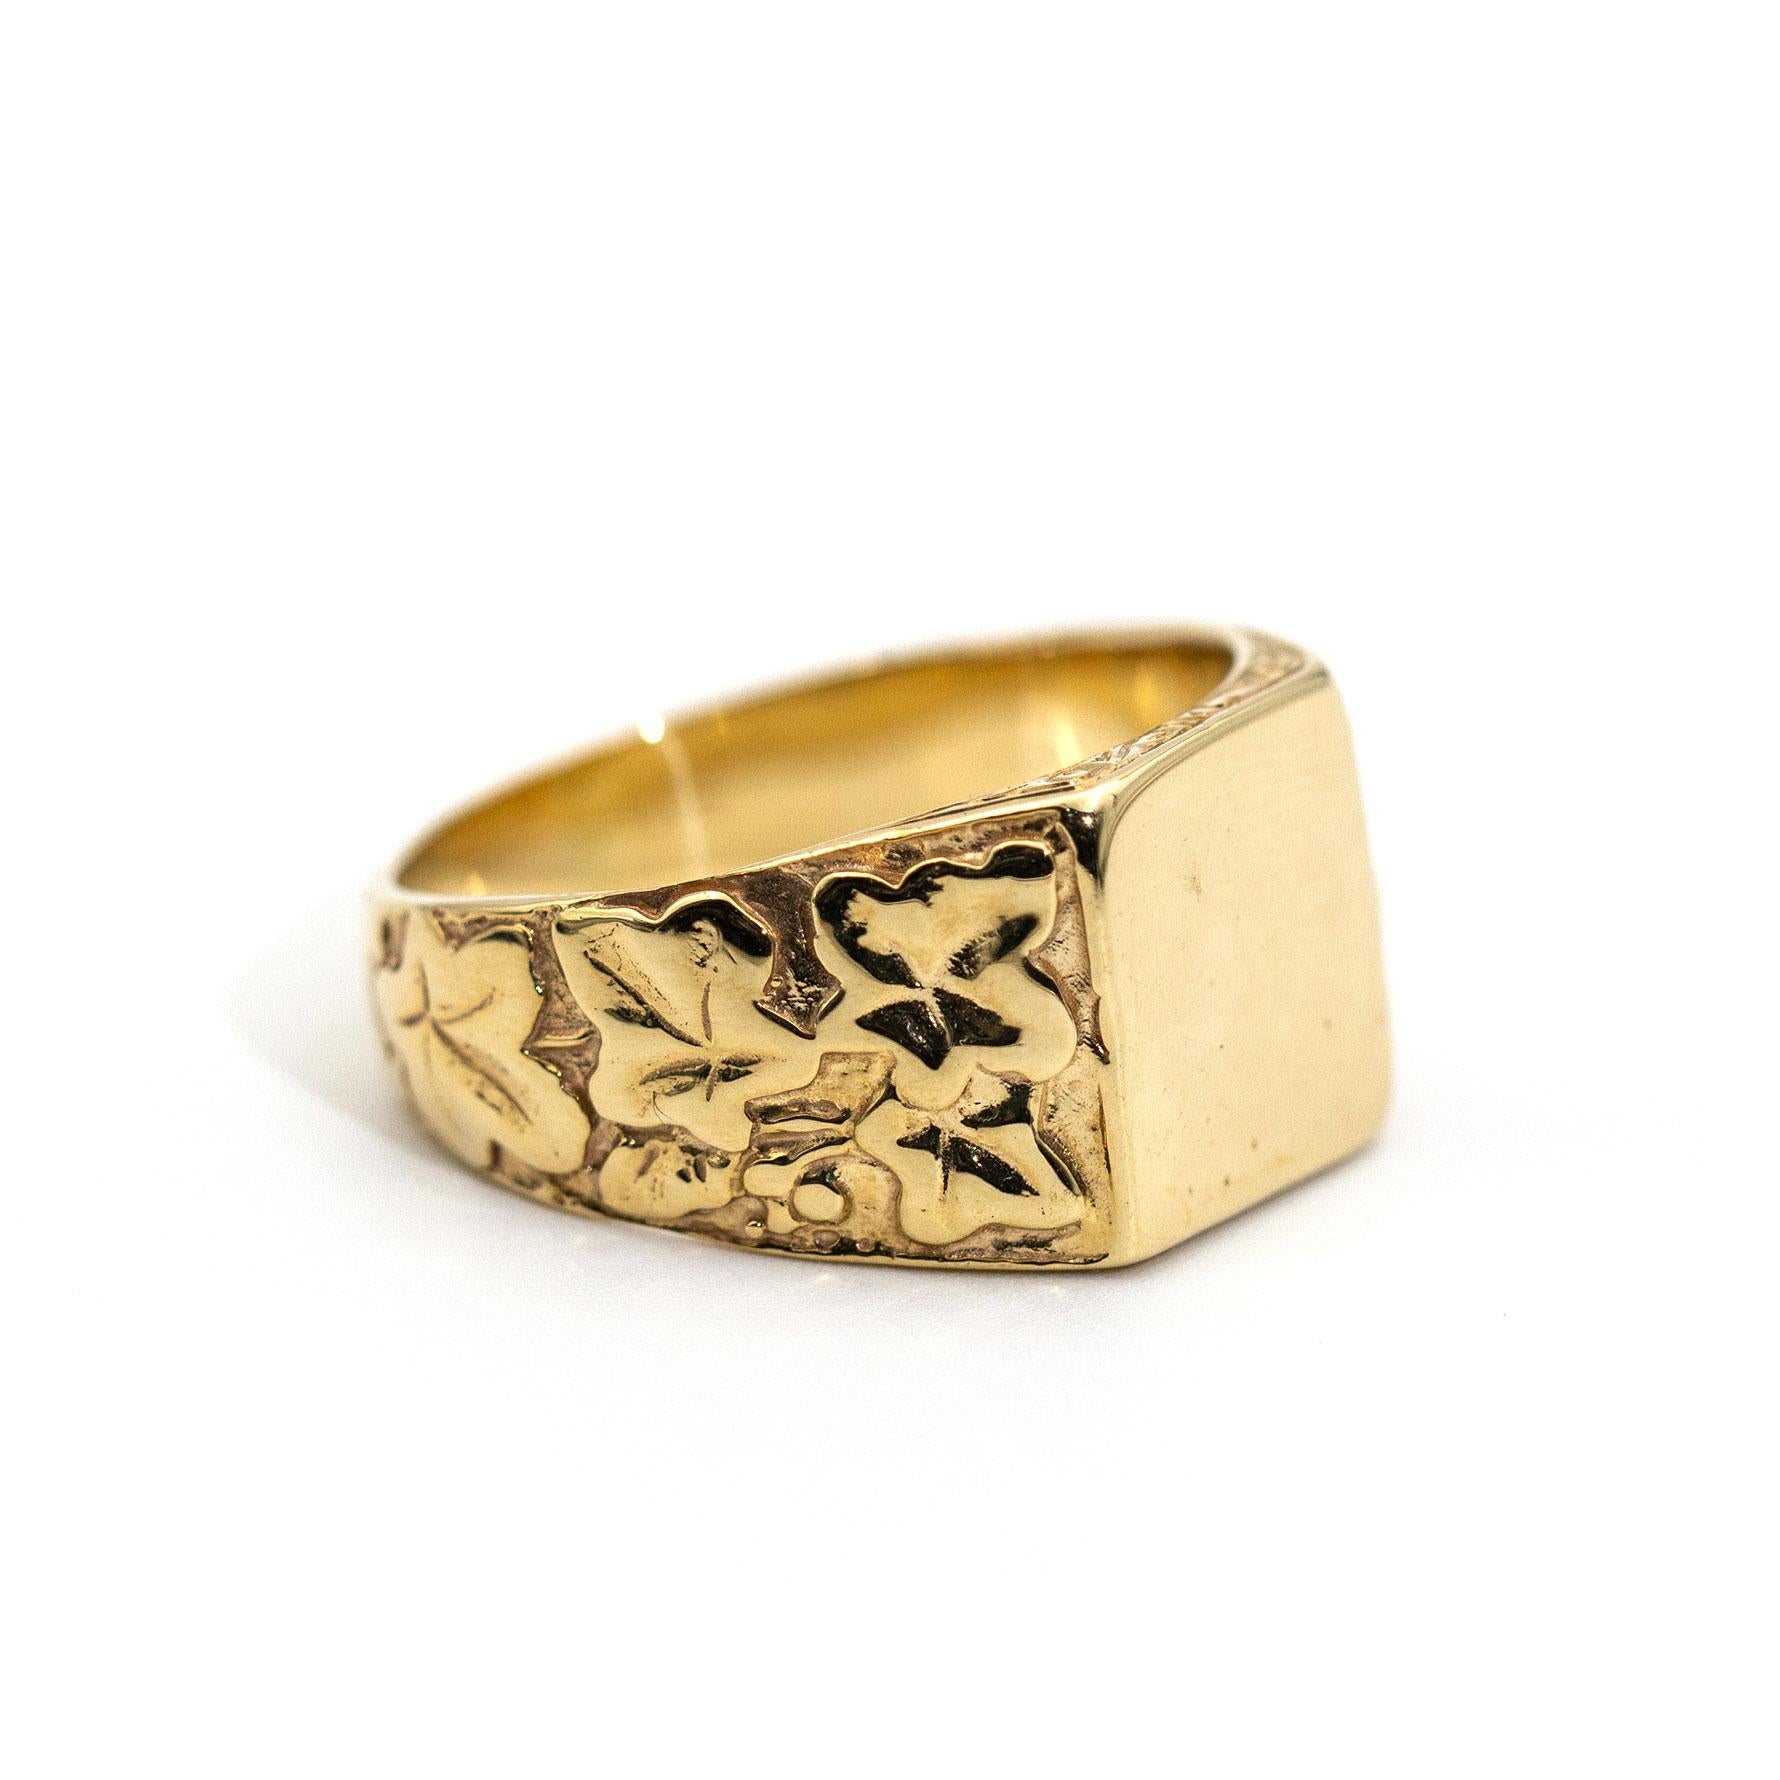 Forged in 9 carat yellow gold is this handsome mens signet ring featuring unique leaf patterned shoulders that flow up to a flat square top ready for engraving your own family crest or initials if you so please. We have named this dapper ring The